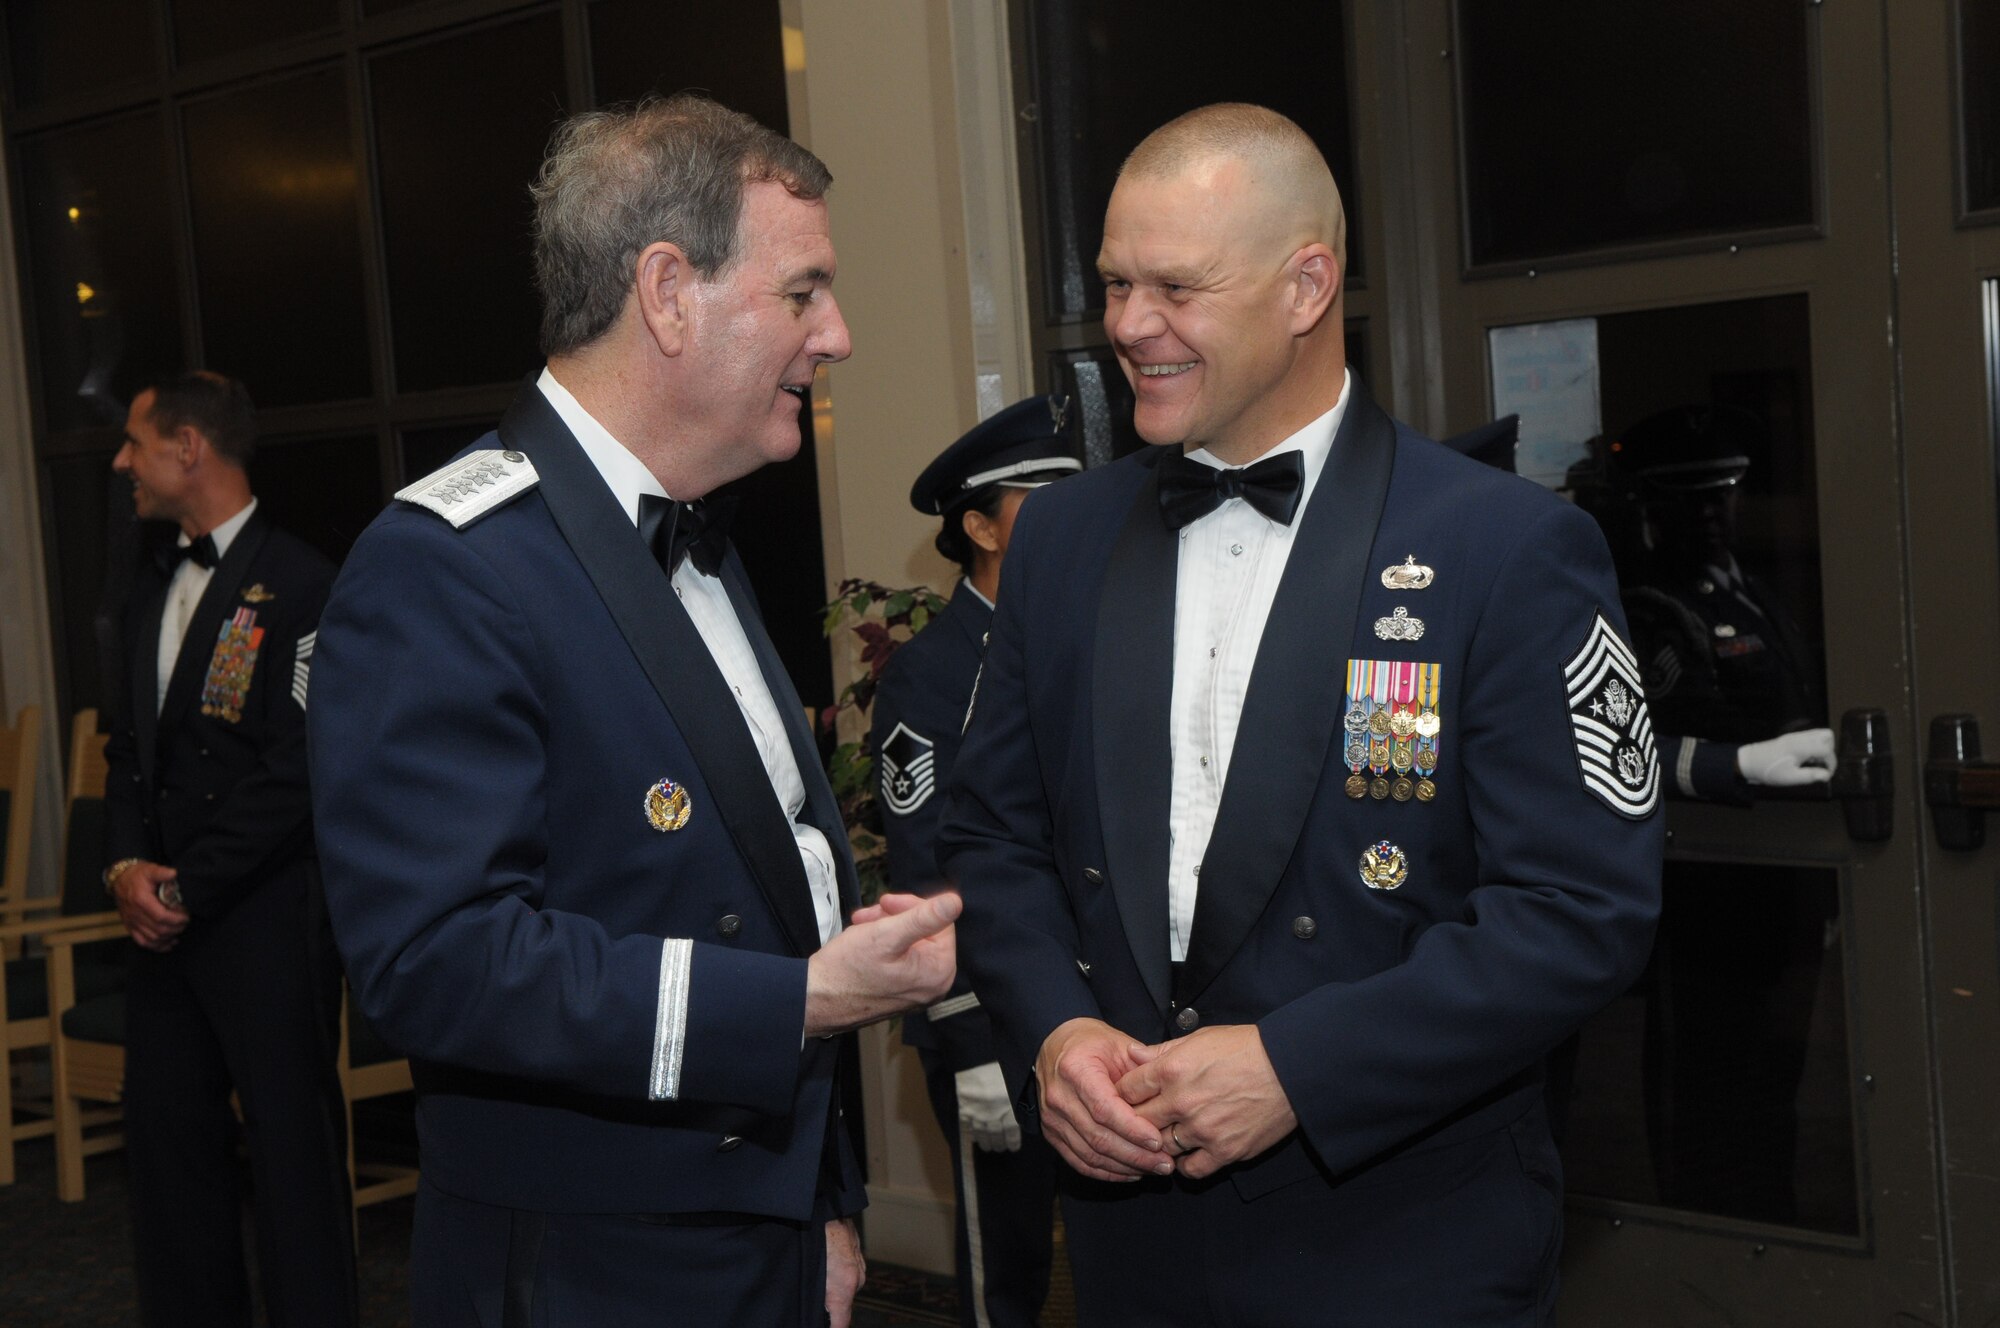 Gen. Stephen R. Lorenz, Commander, Air Education and Training Command, talks with Chief Master Sgt. James A. Roy, Chief Master Sgt. of the Air Force, after his induction into the Order of the Sword, at the Gateway Club on Lackland AFB, July 16. More than 300 Airmen from across AETC gathered to witness General Lorenz’s induction. The Order of the Sword is the highest honor and tribute noncommissioned officers can bestow upon an individual. (U.S. Air Force photo/Joel Martinez)